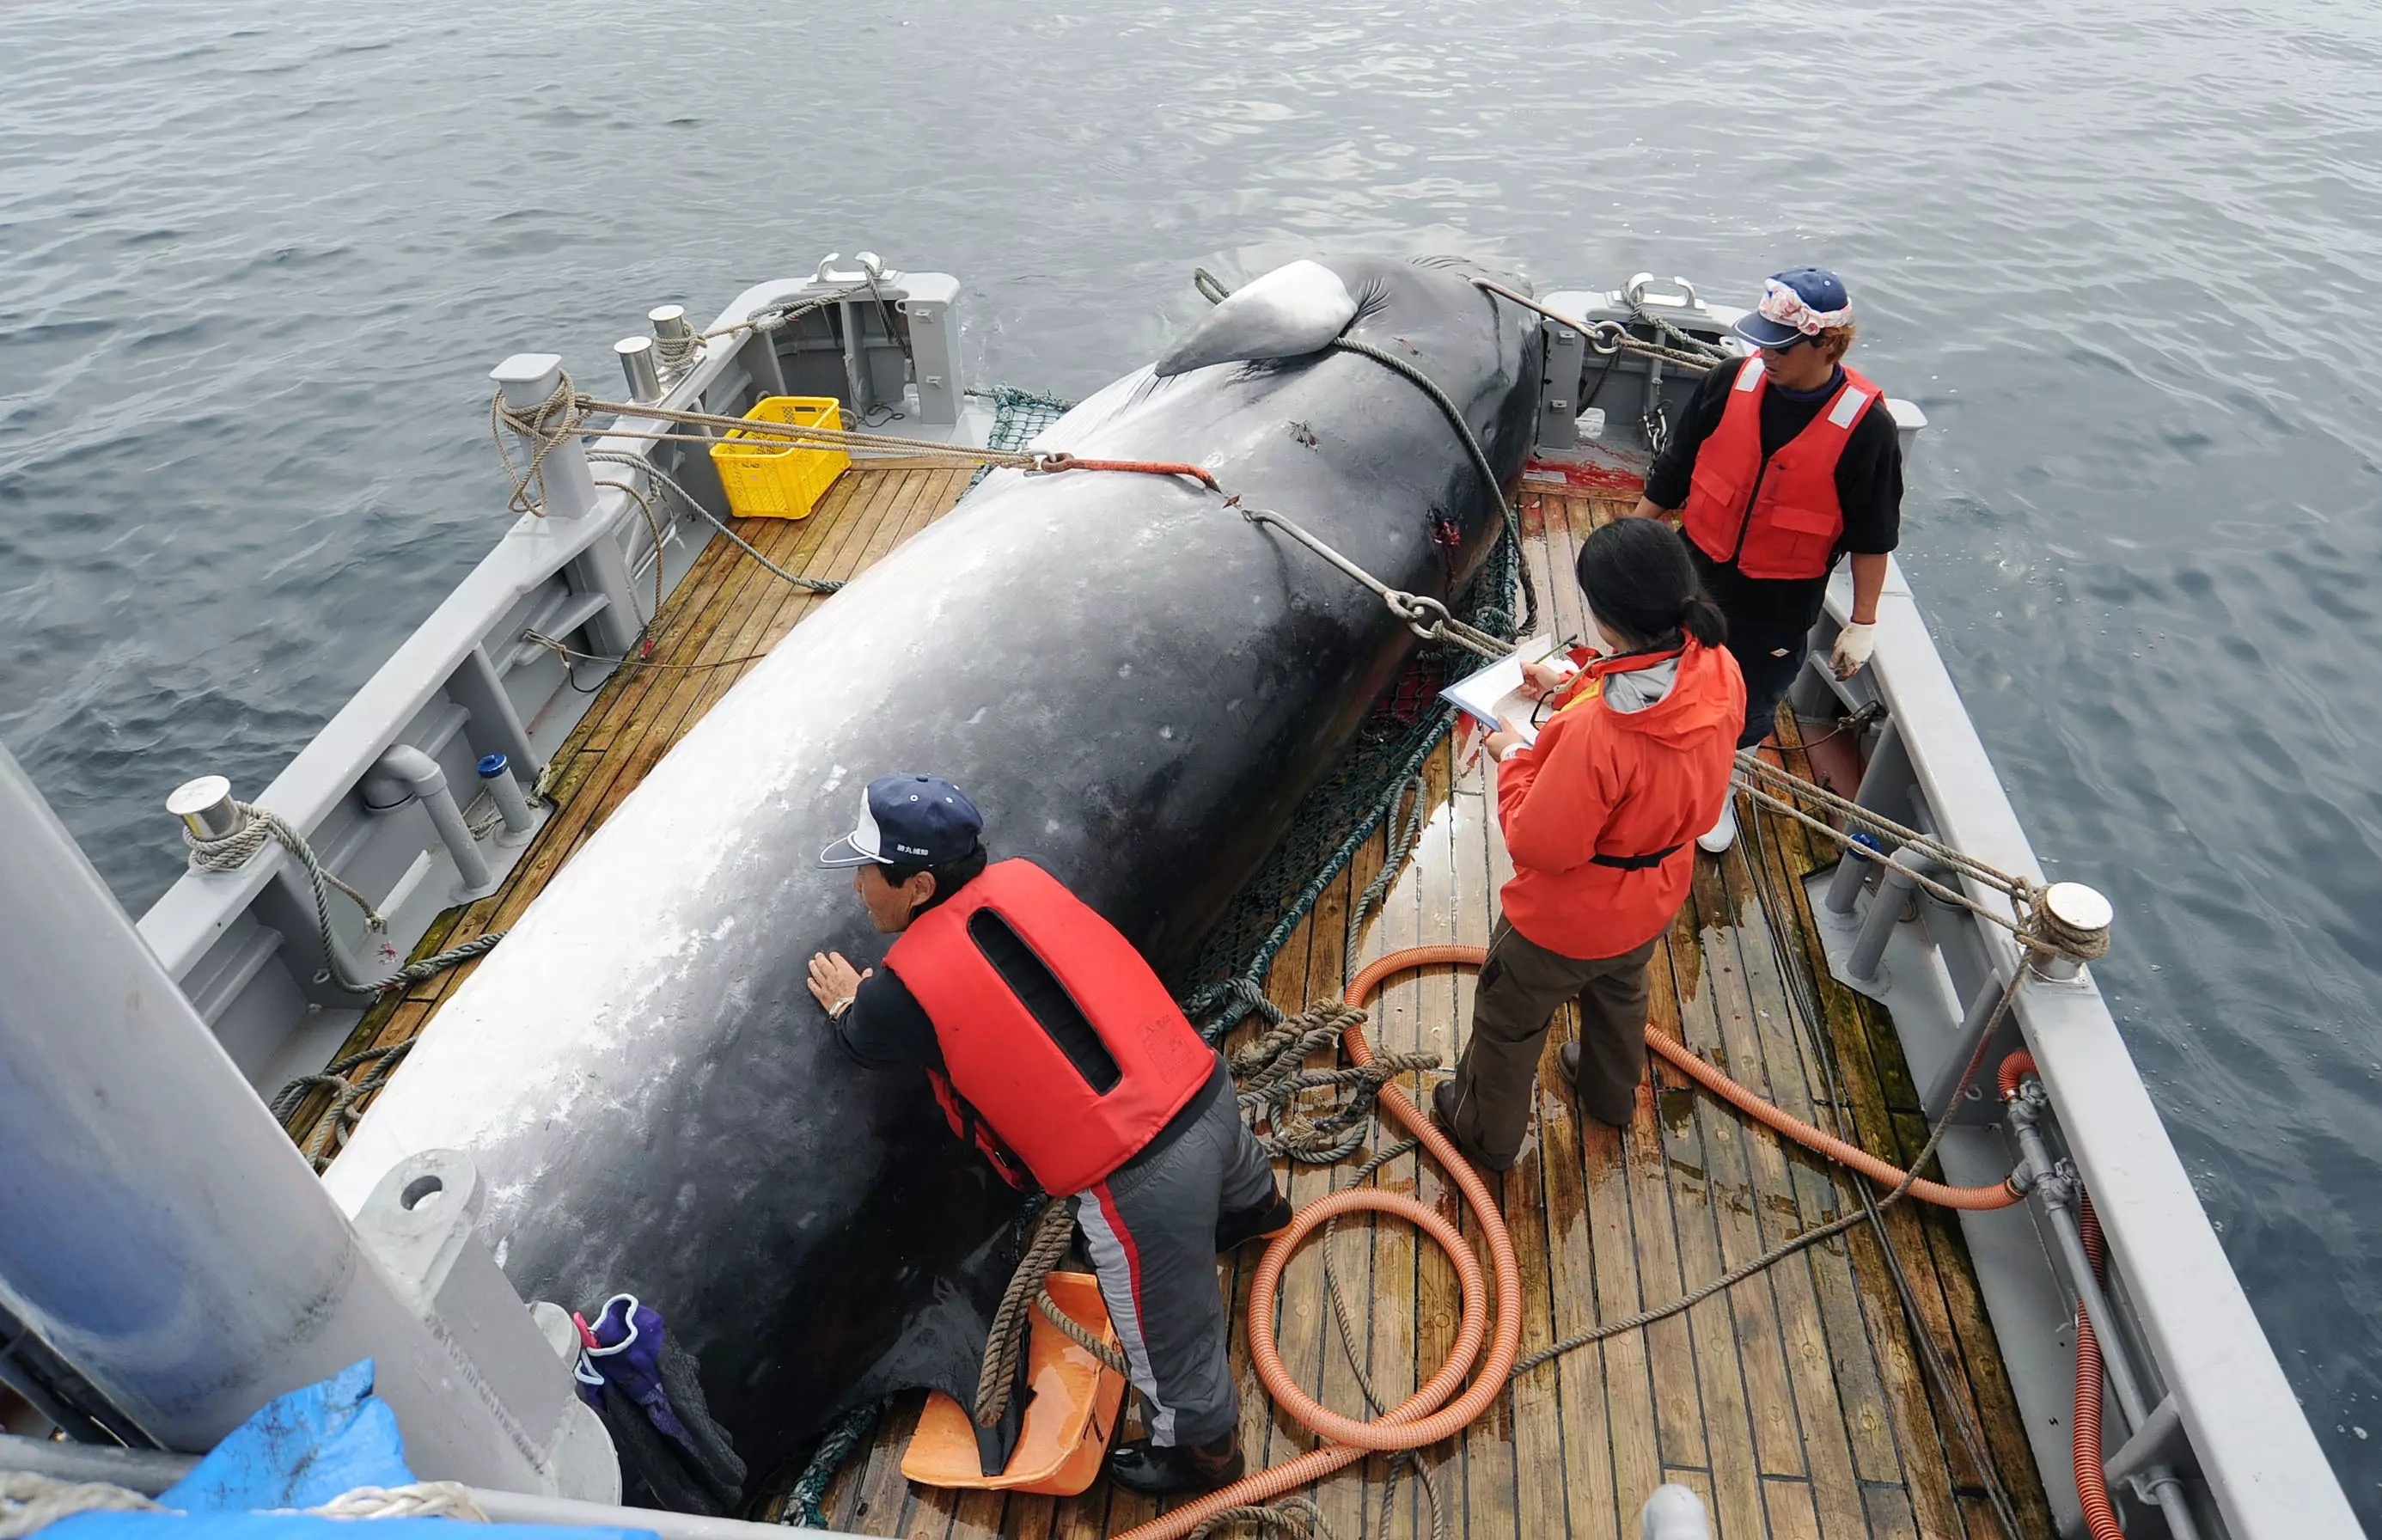 A minke whale is unloaded at a port after a whaling for scientific purposes in Kushiro.